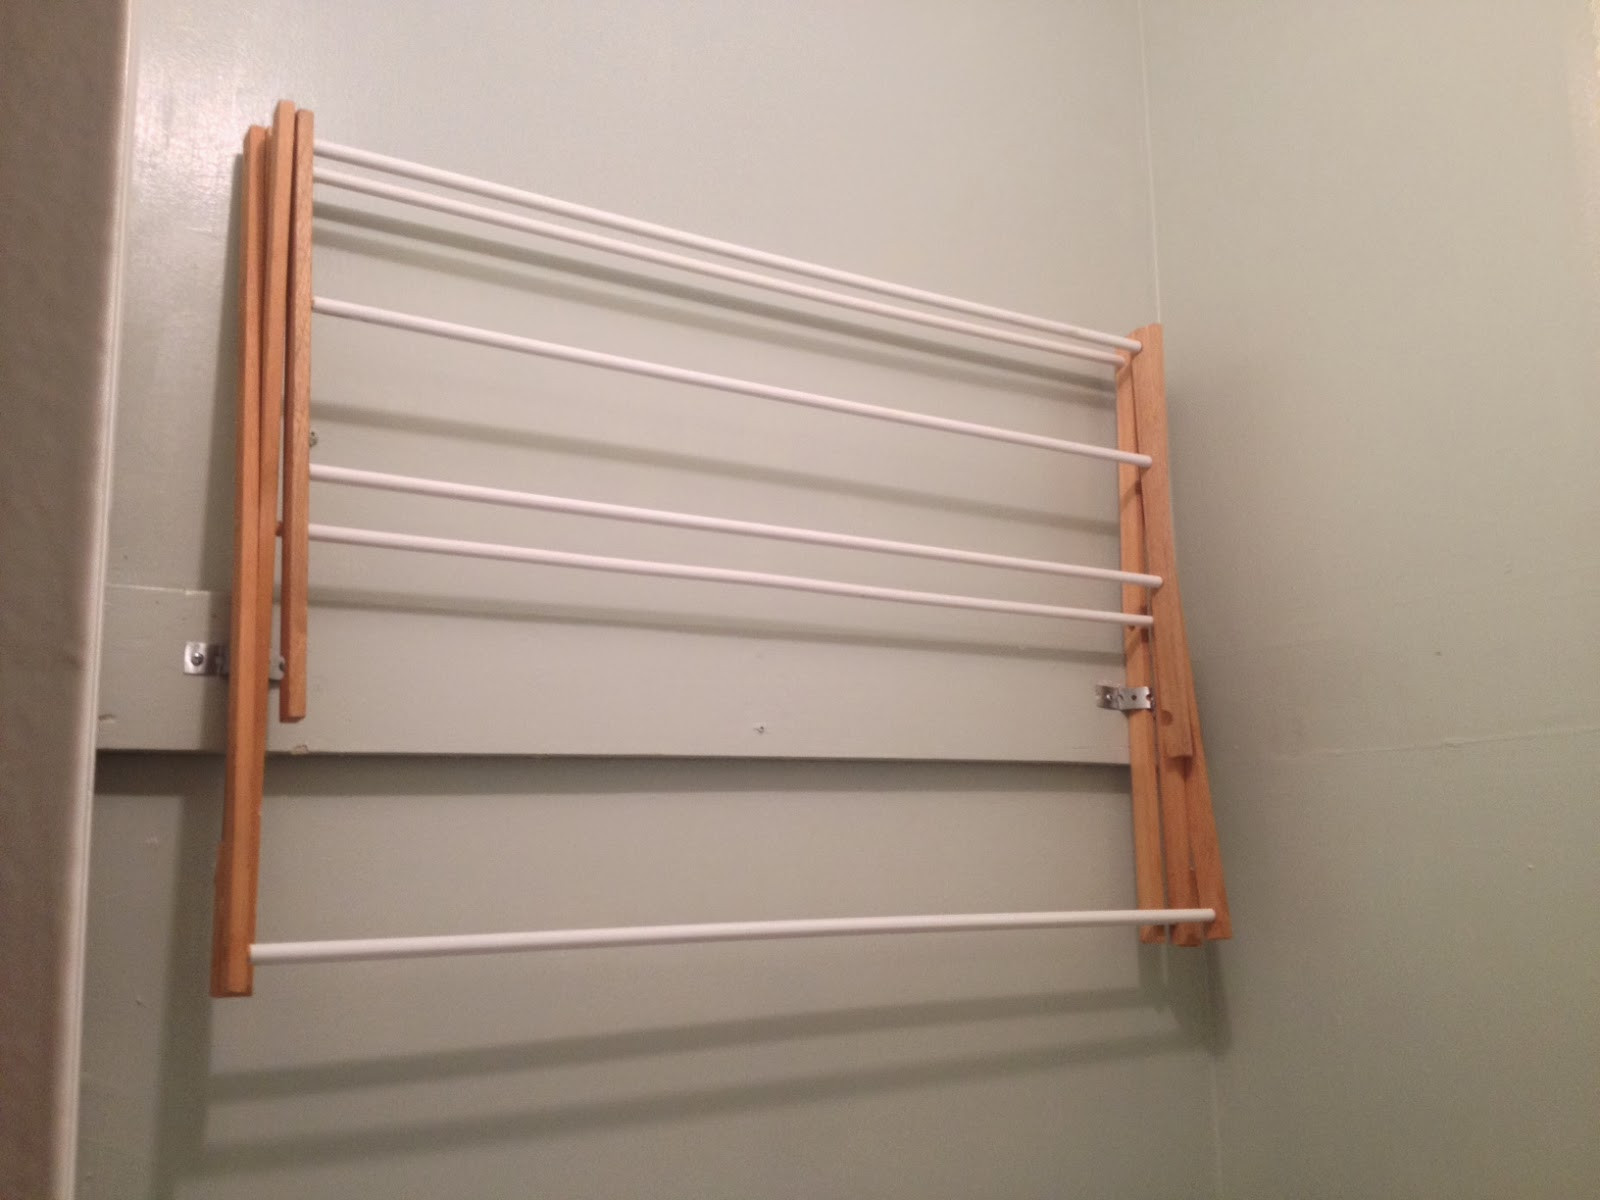 DIY Wall Mounted Laundry Drying Rack
 Two It Yourself DIY Laundry Drying Rack Wall Mount from